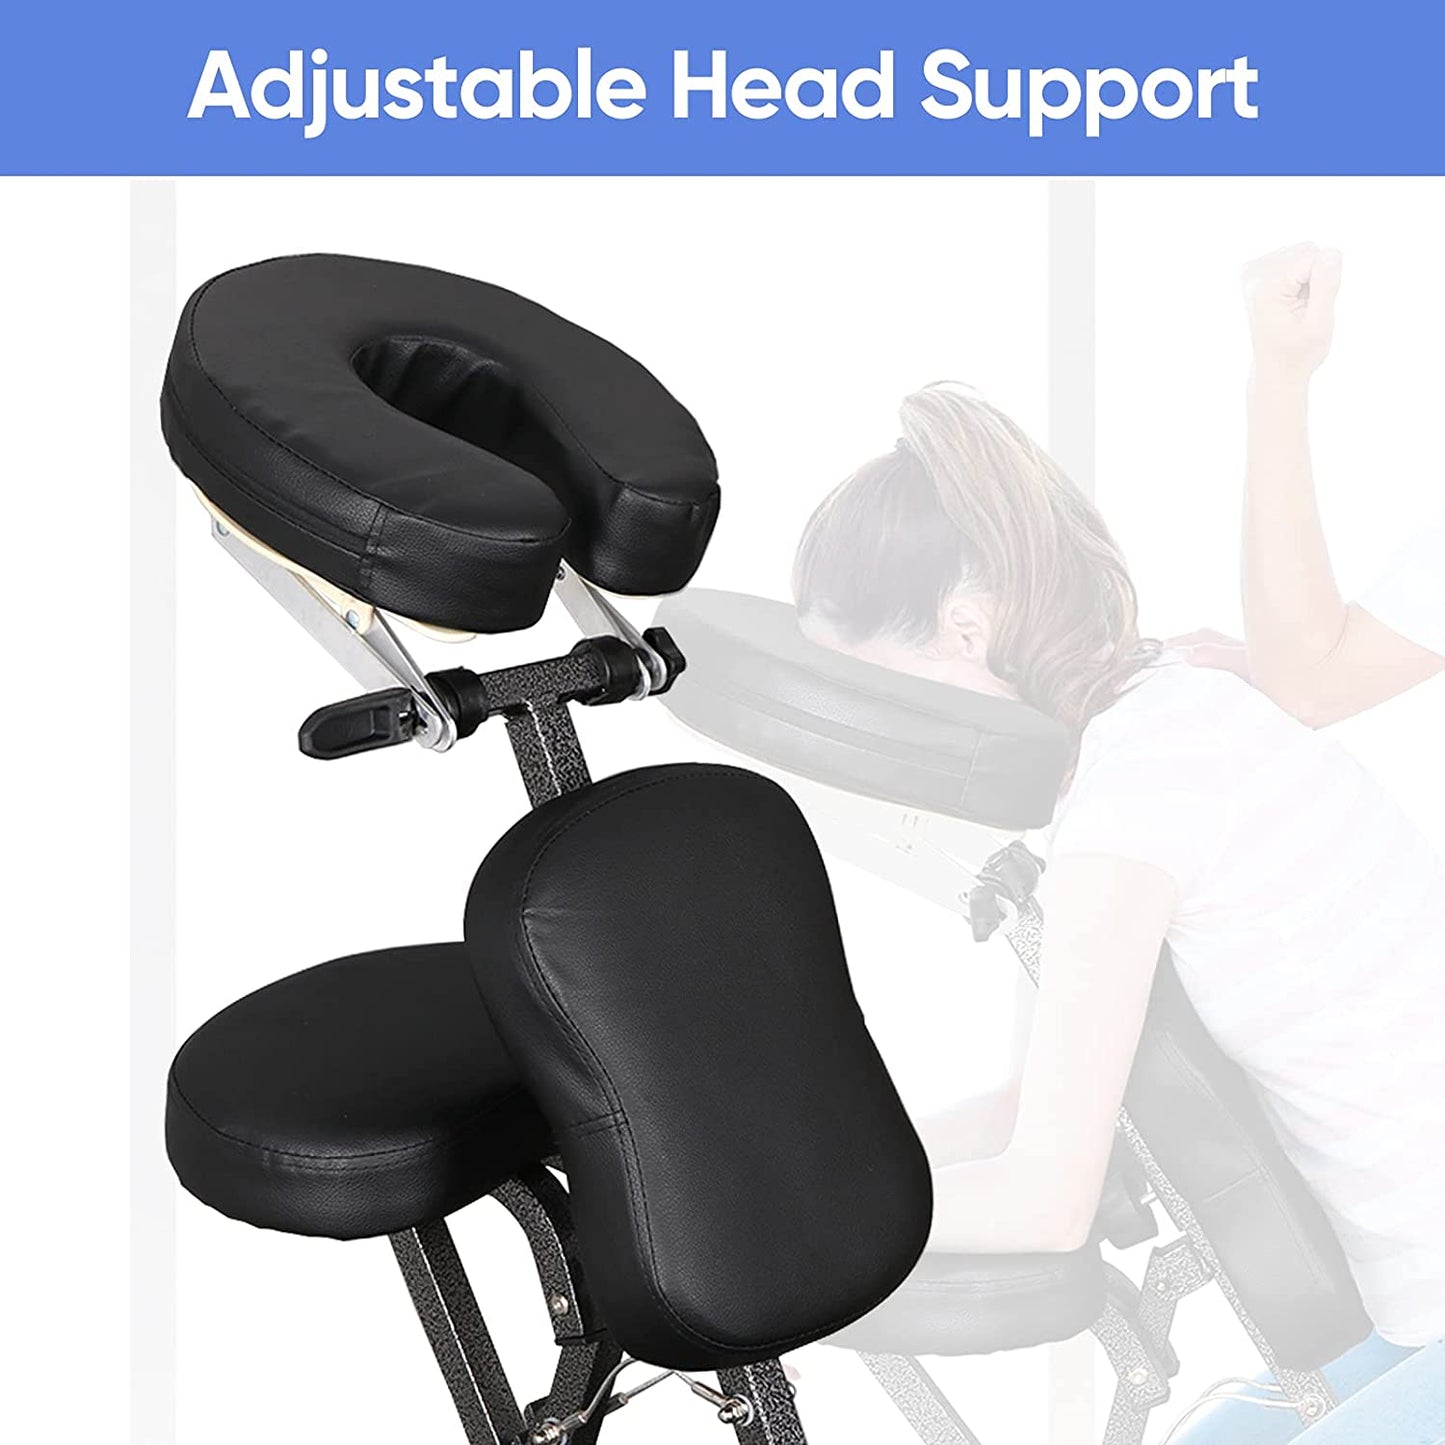 Portable Massage Chair Foldable Tattoo Chair Adjustable Therapy Chair with Face Cradle Comfortable Thick Foam w/Carrying Bag